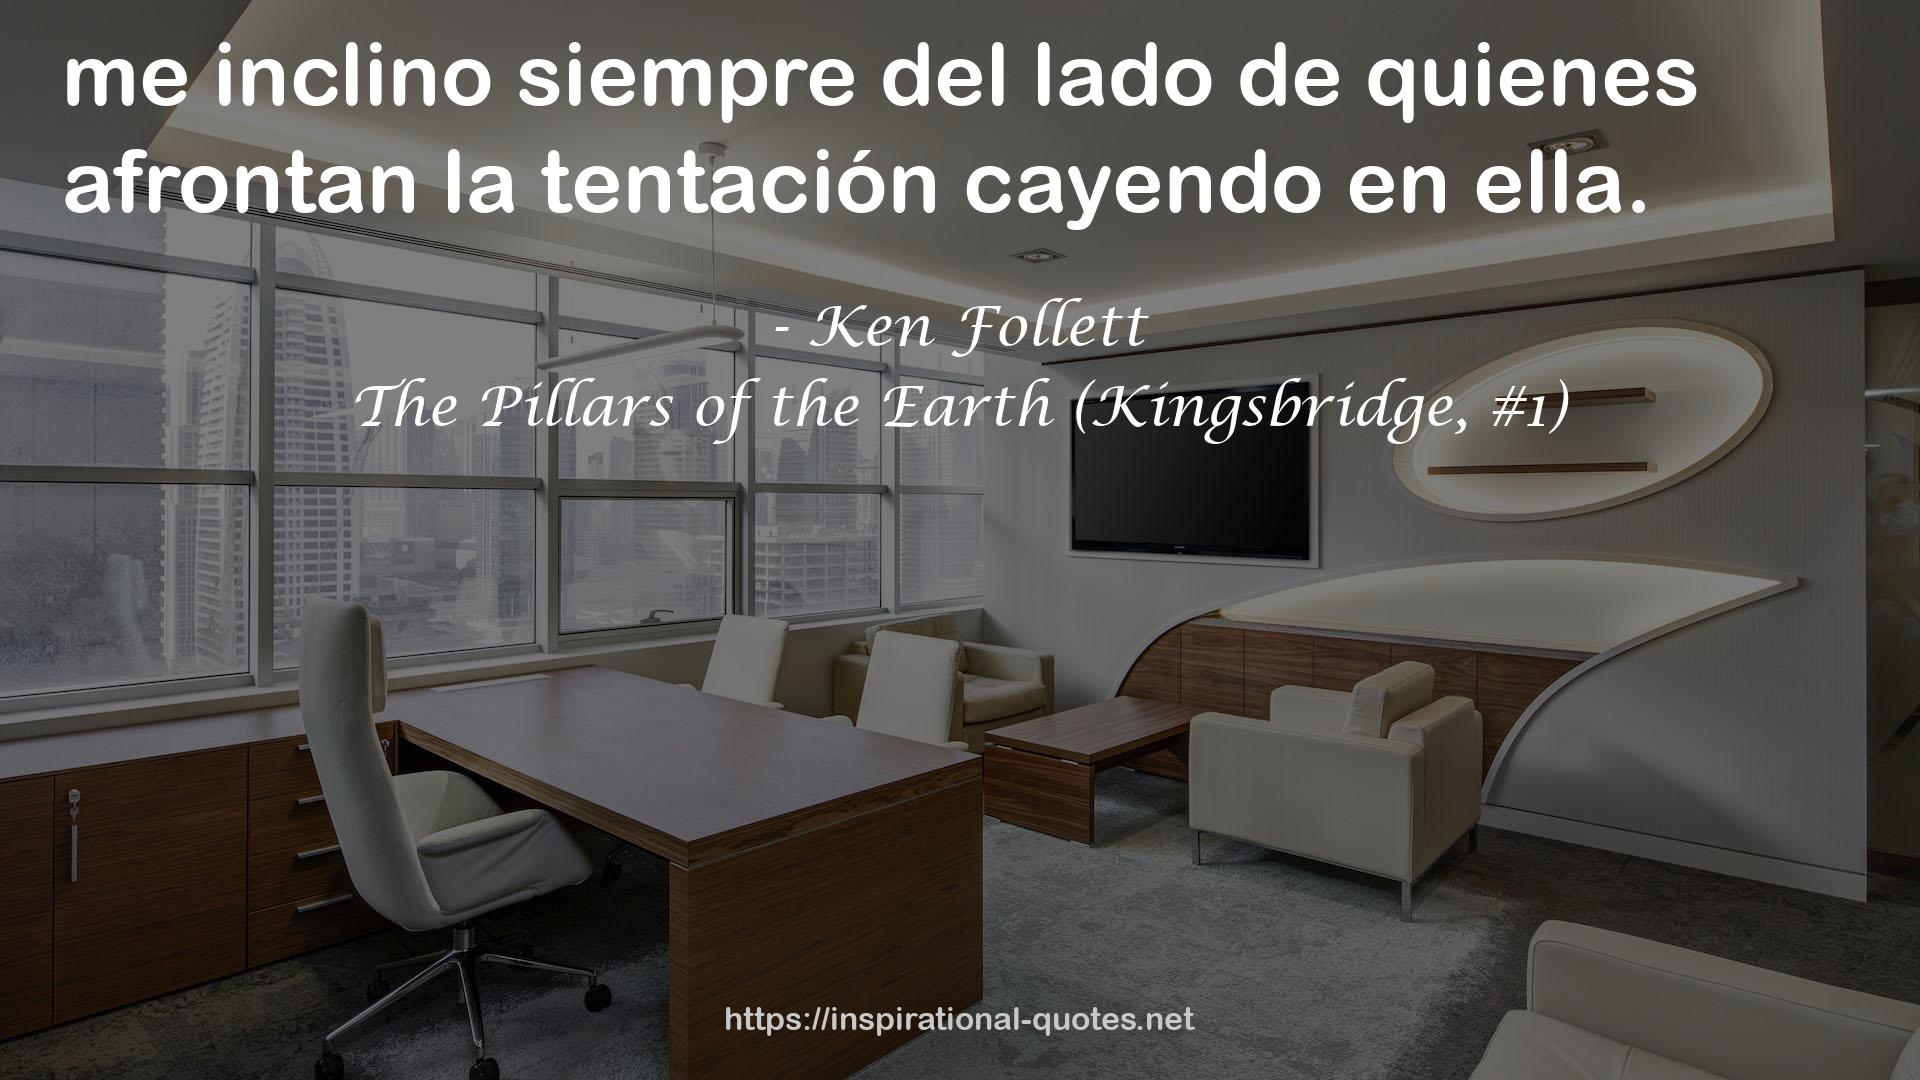 The Pillars of the Earth (Kingsbridge, #1) QUOTES